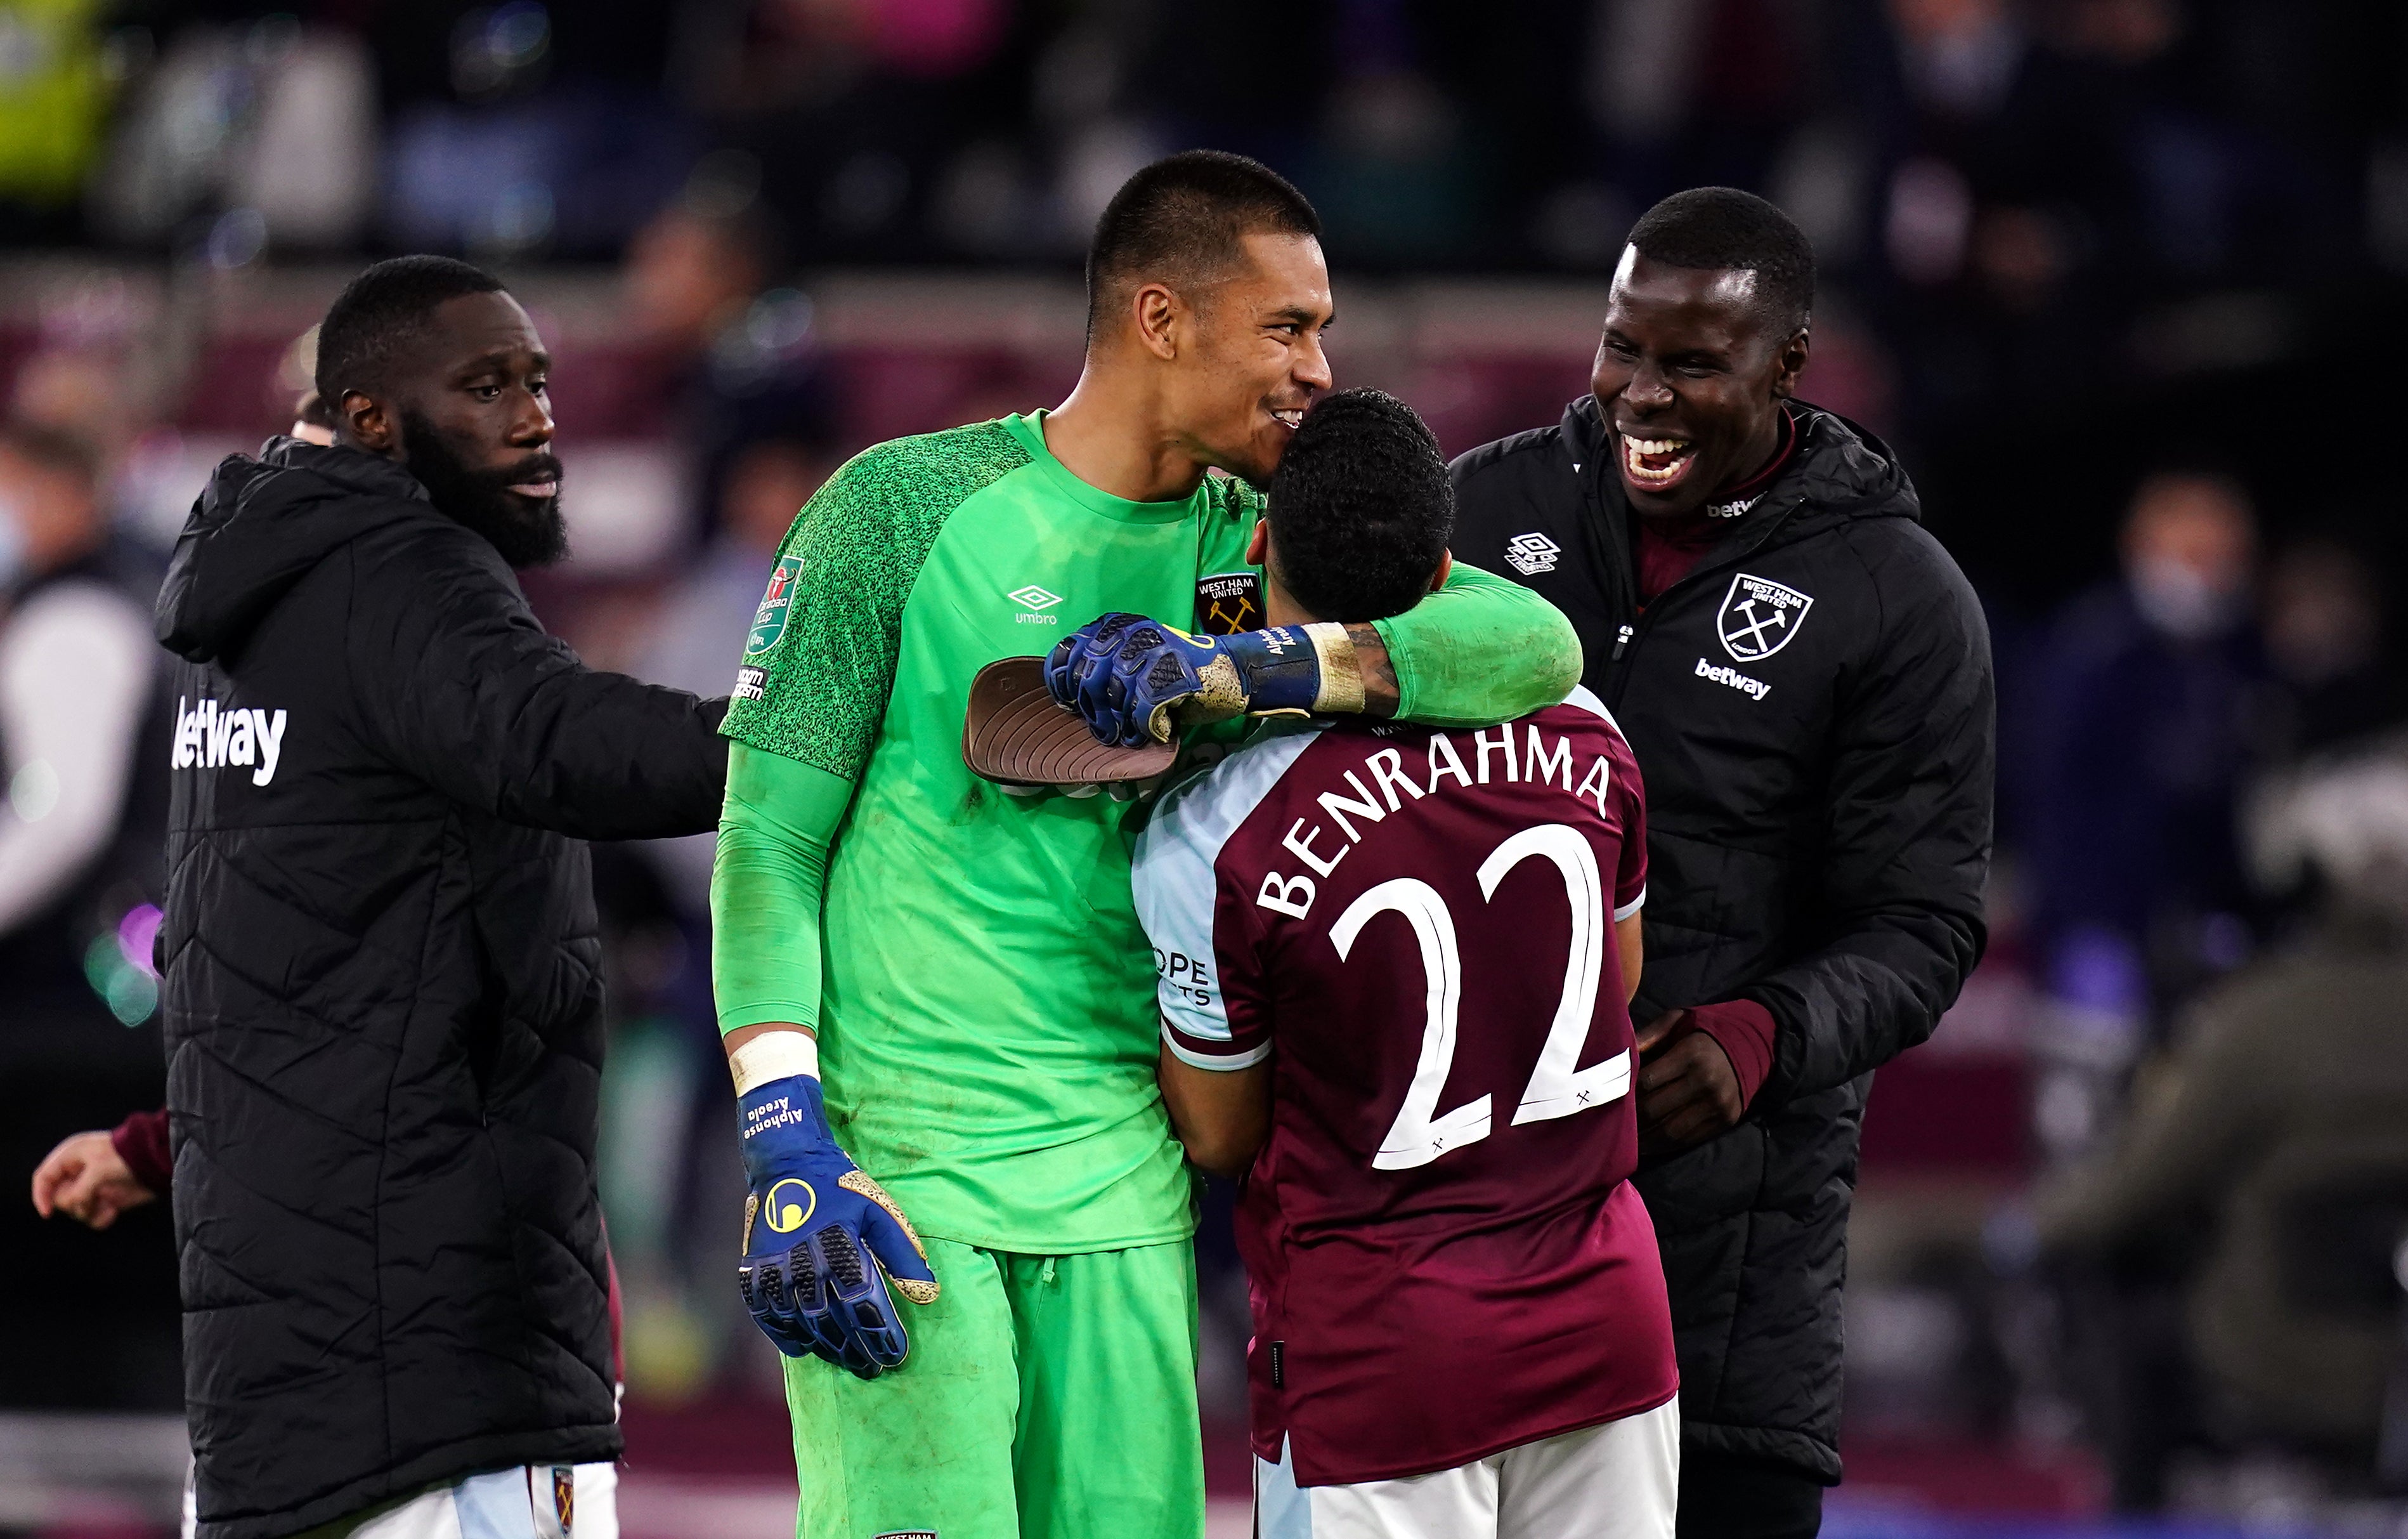 Can West Ham follow-up their penalty shoot-out win over Manchester City when they face Tottenham in the Carabao Cup quarter-finals? (John Walton/PA)